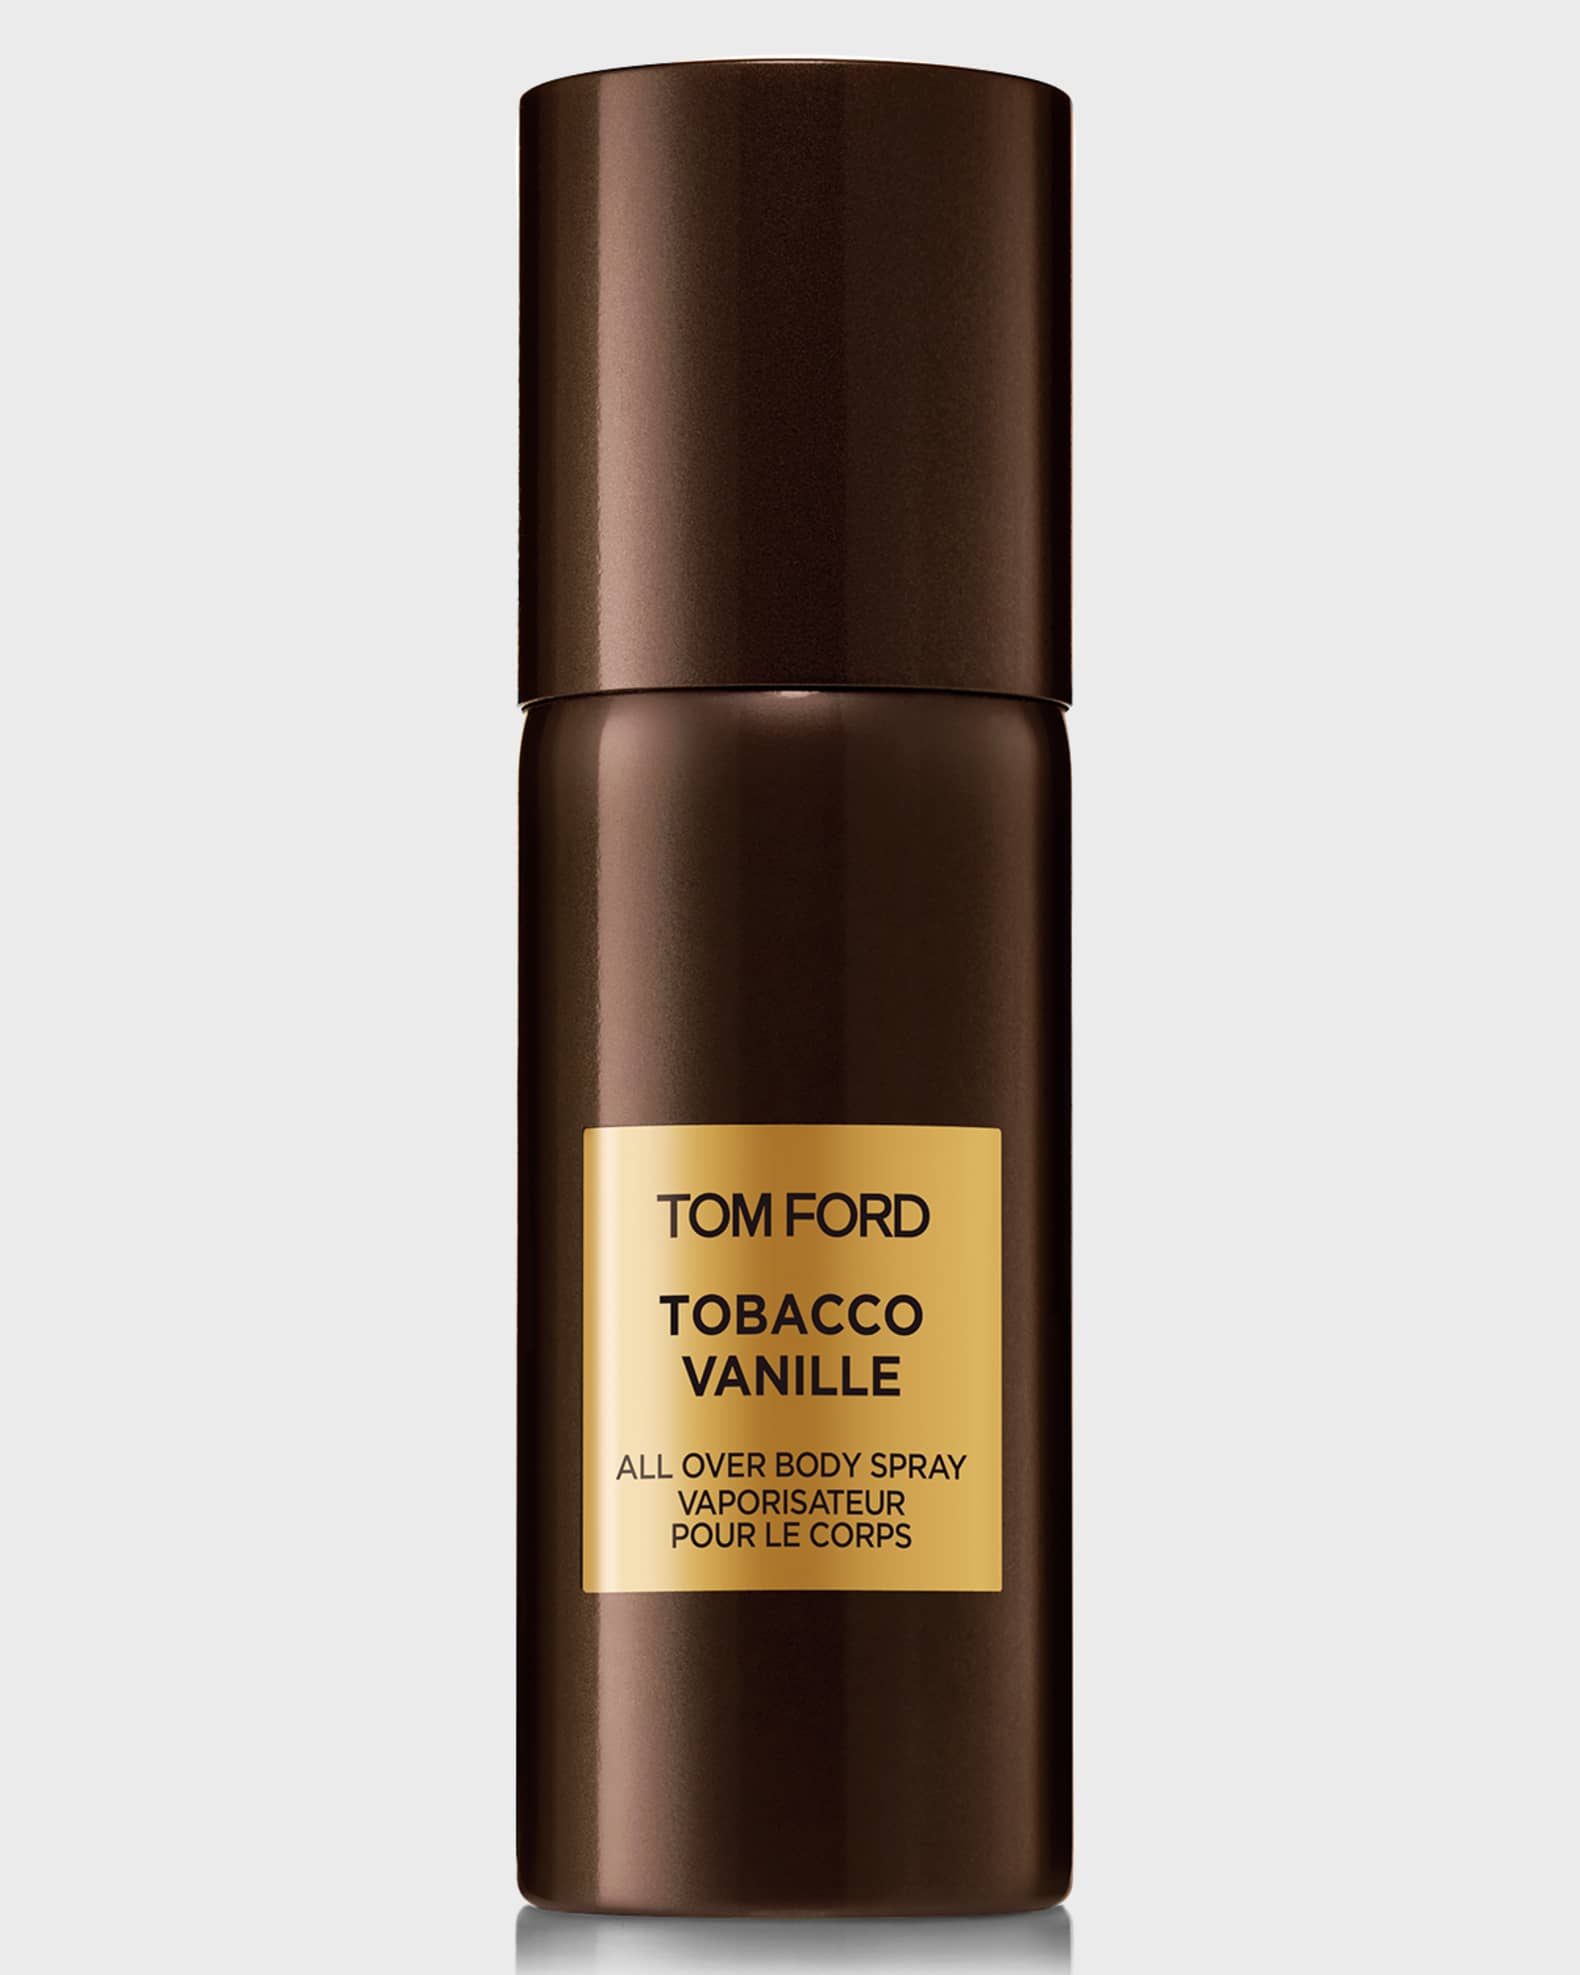  Tom Ford Ombre Leather Parfum 3.4 oz / 100 ml Spray New 2021 :  Beauty & Personal Care